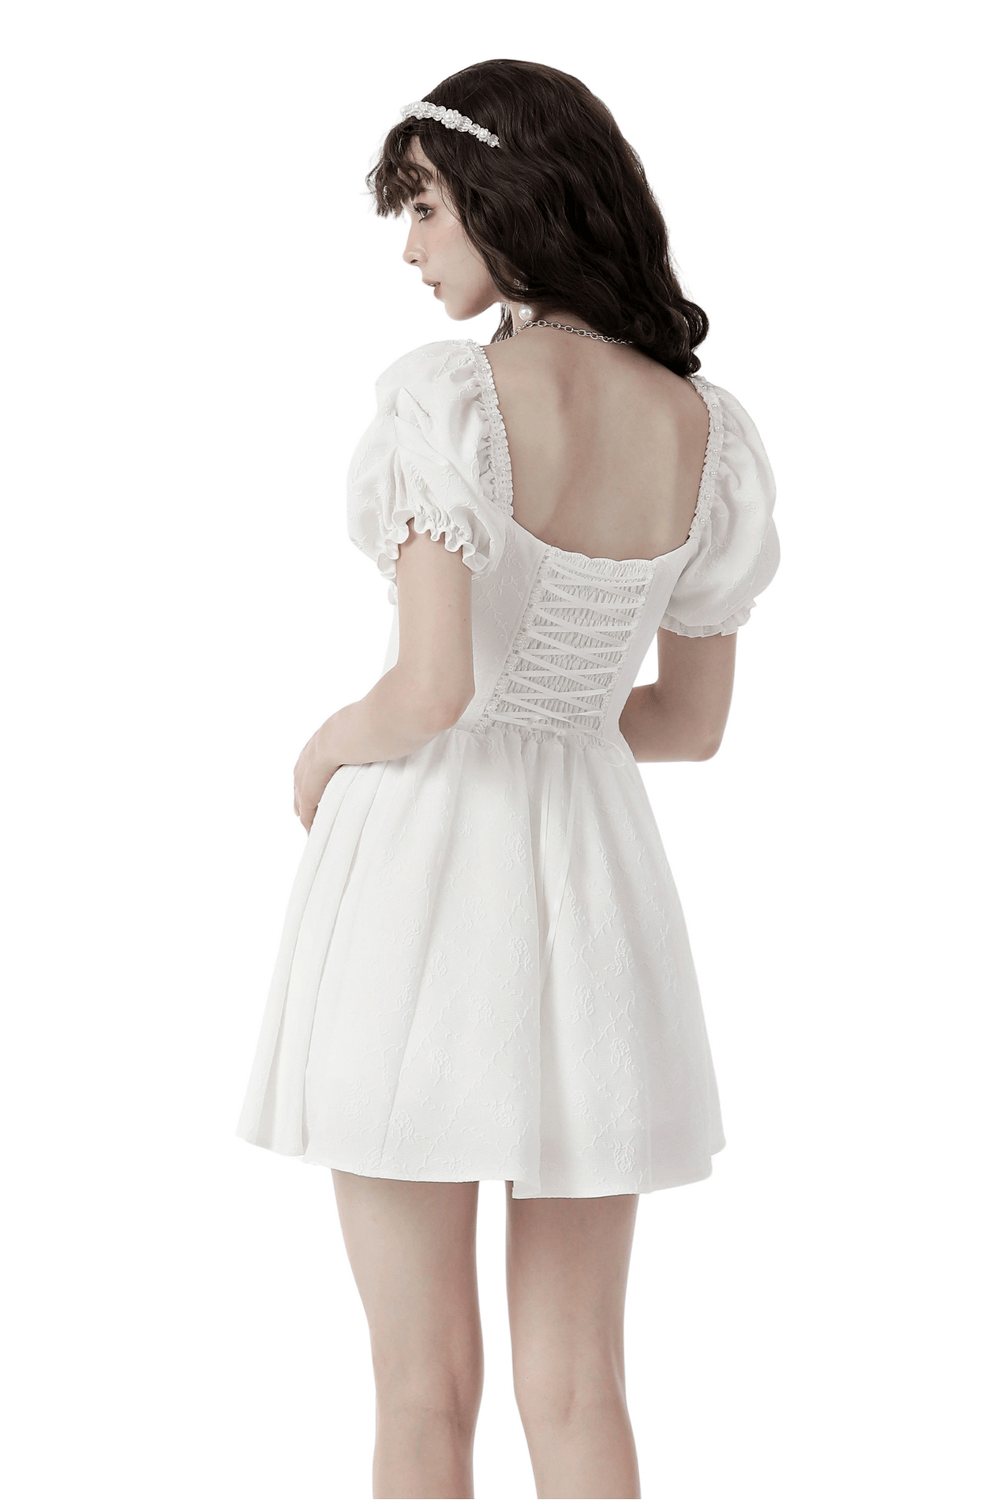 Elegant White Dress with Lace Detail and Puff Sleeves